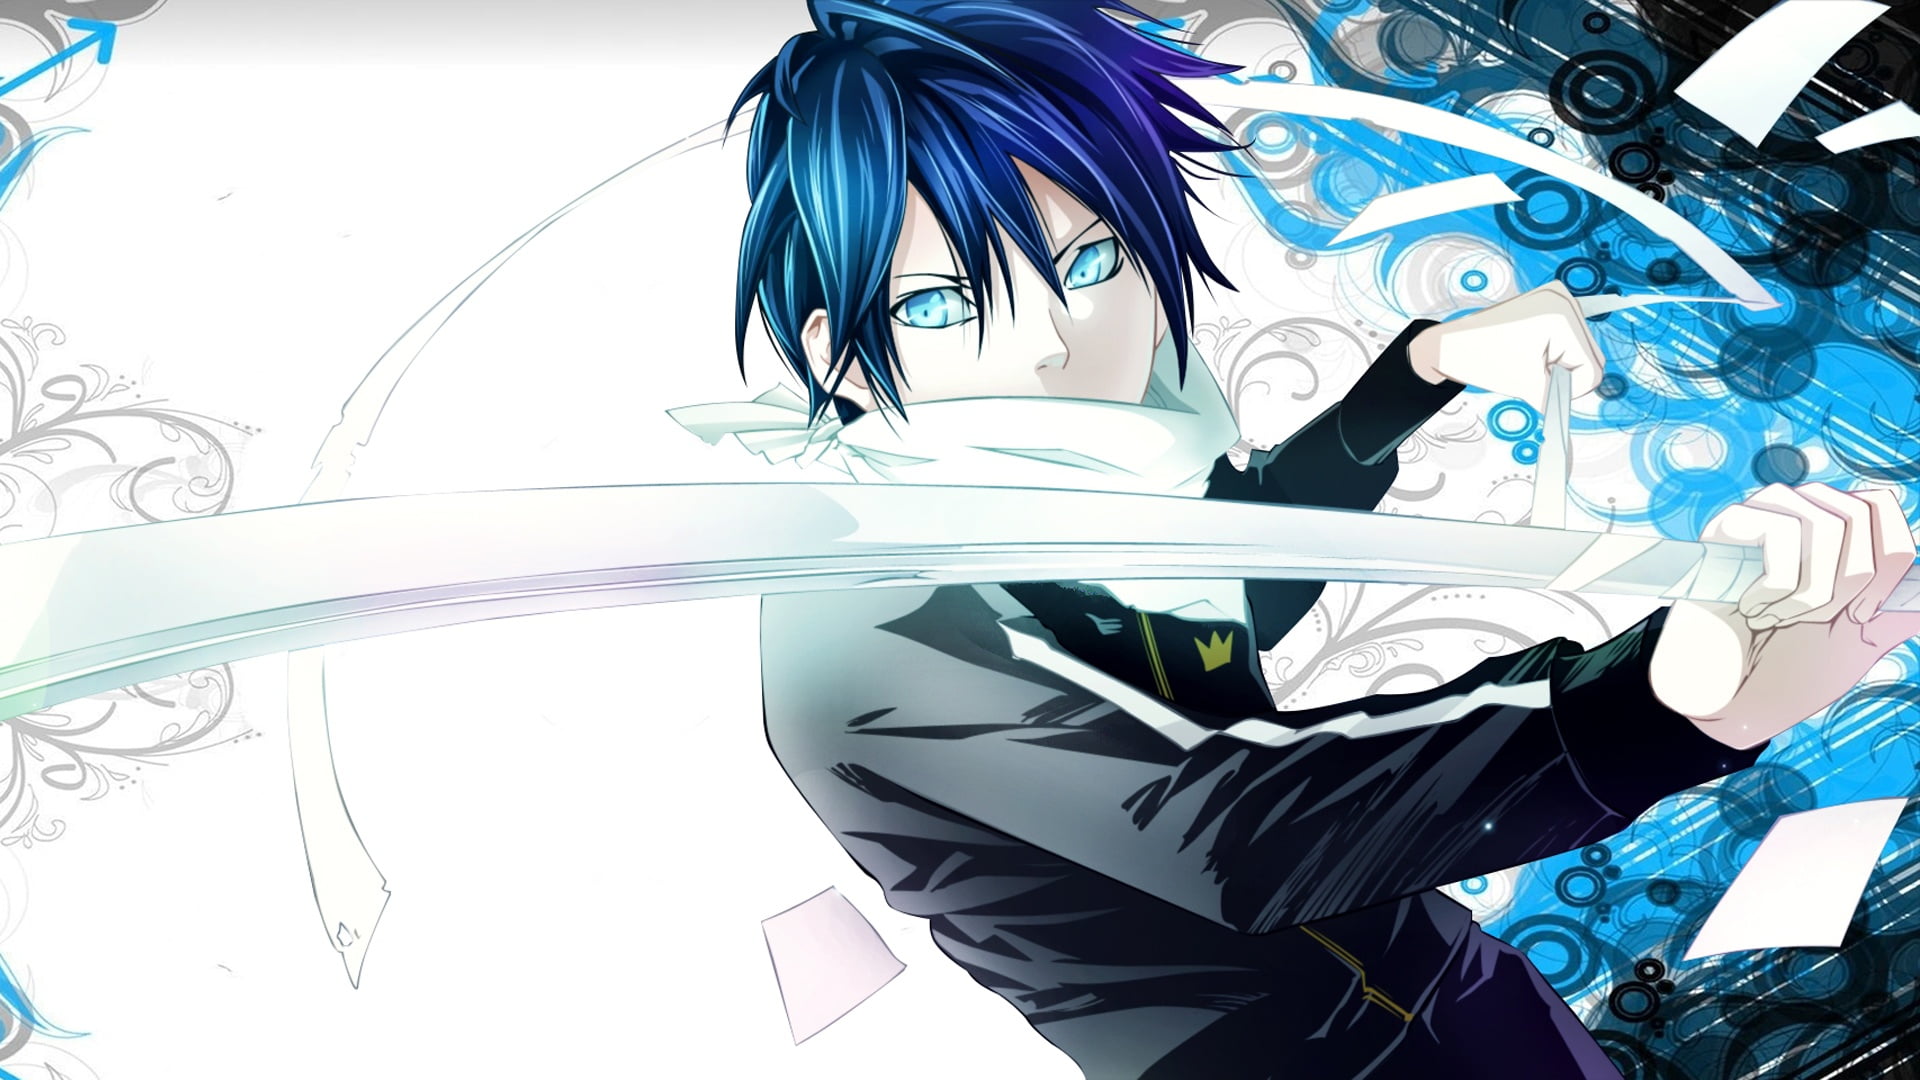 4. Yato from Noragami - wide 3